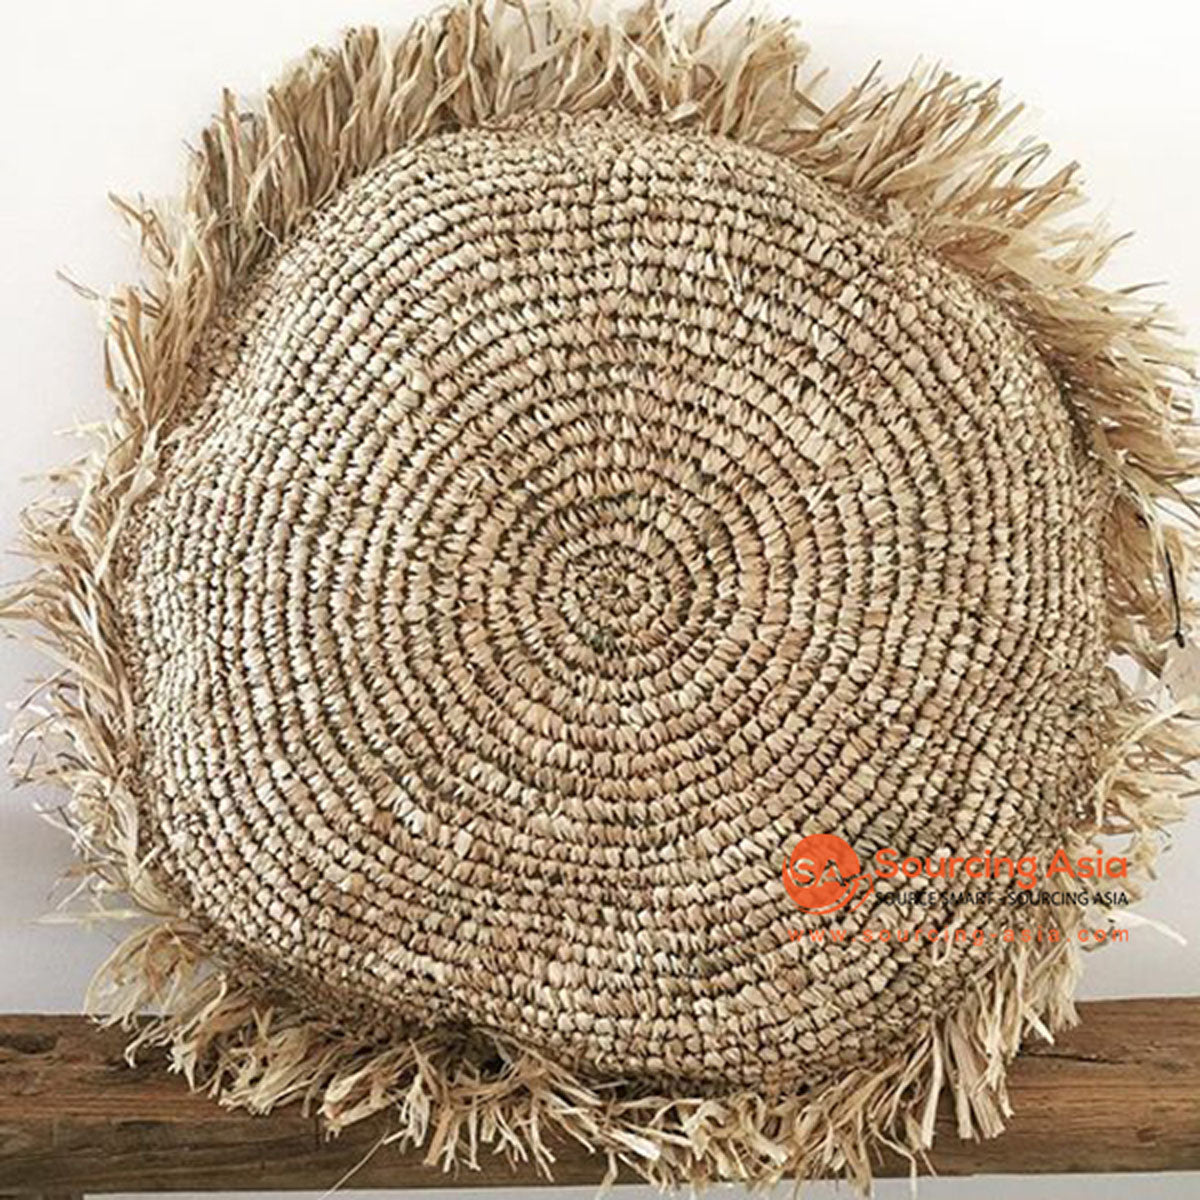 SHL049C NATURAL RAFFIA ROUND CUSHION WITH FRINGE (PRICE WITH INNER)